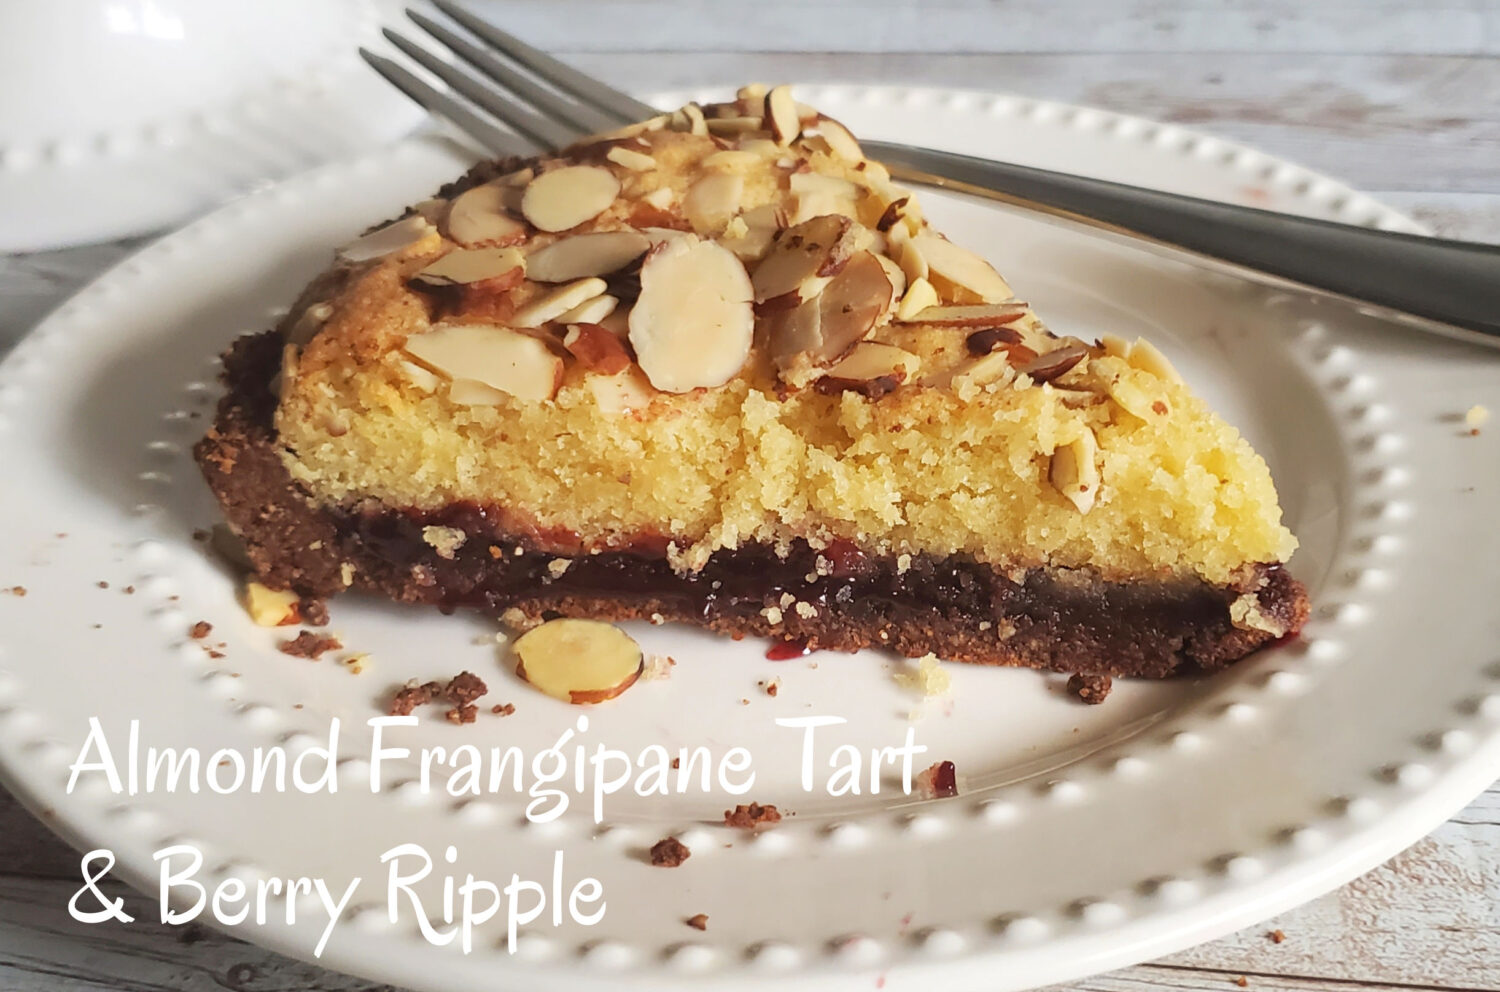 A moist, tender and creamy French almond filling, rippled with a layer of berry jam, topped with sliced almonds and baked in a chocolate almond crust.